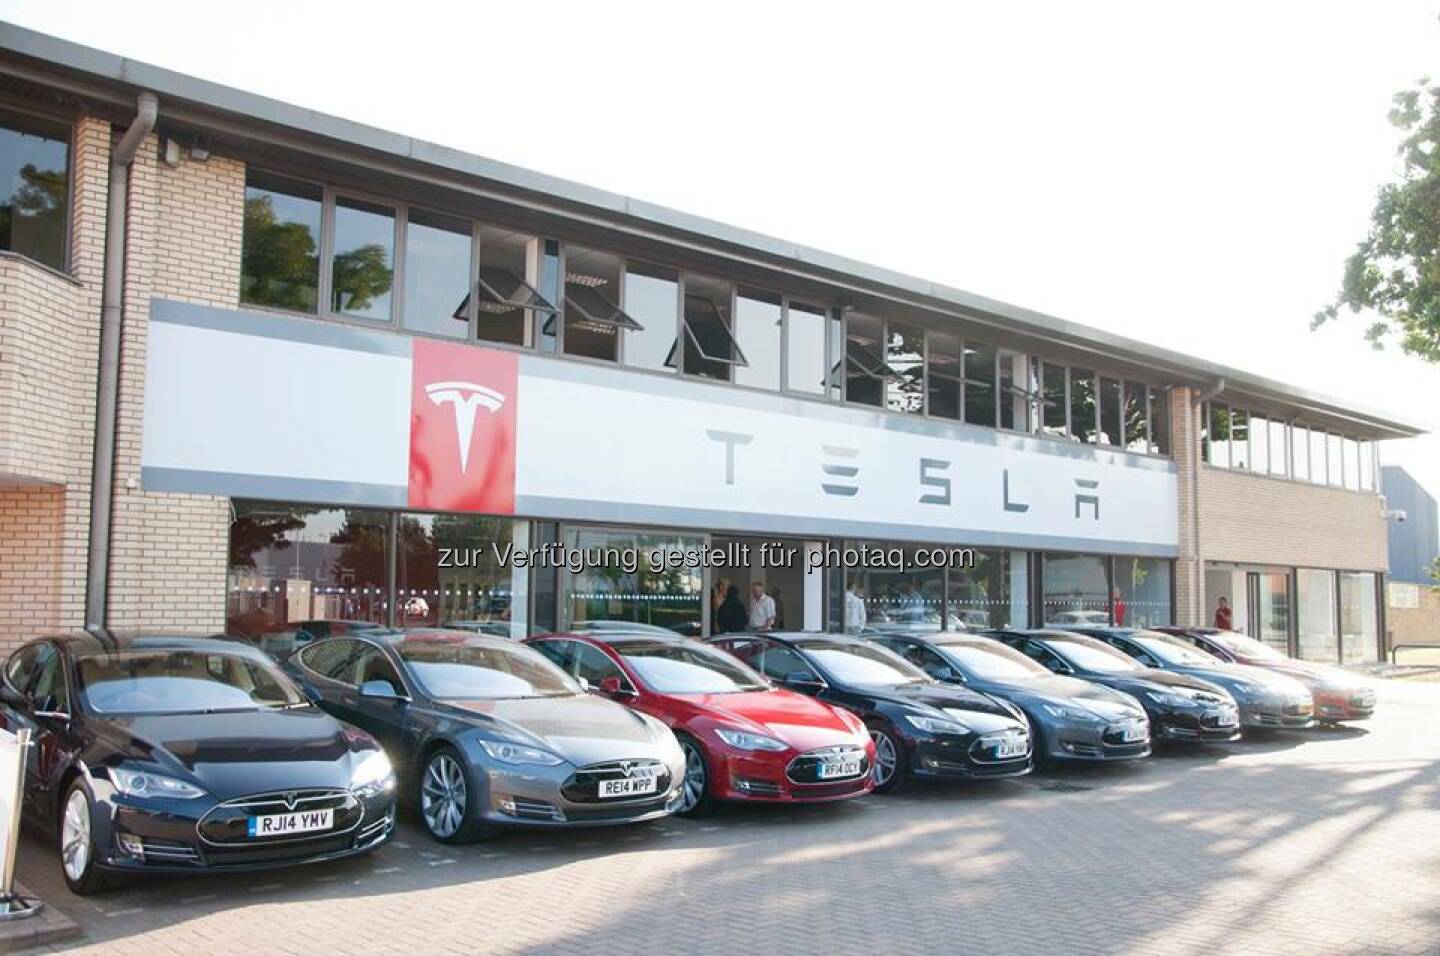 West London is now open. See what Tesla locations are nearest you & drive Model S: www.teslamotors.com/findus/stores  Source: http://facebook.com/teslamotors